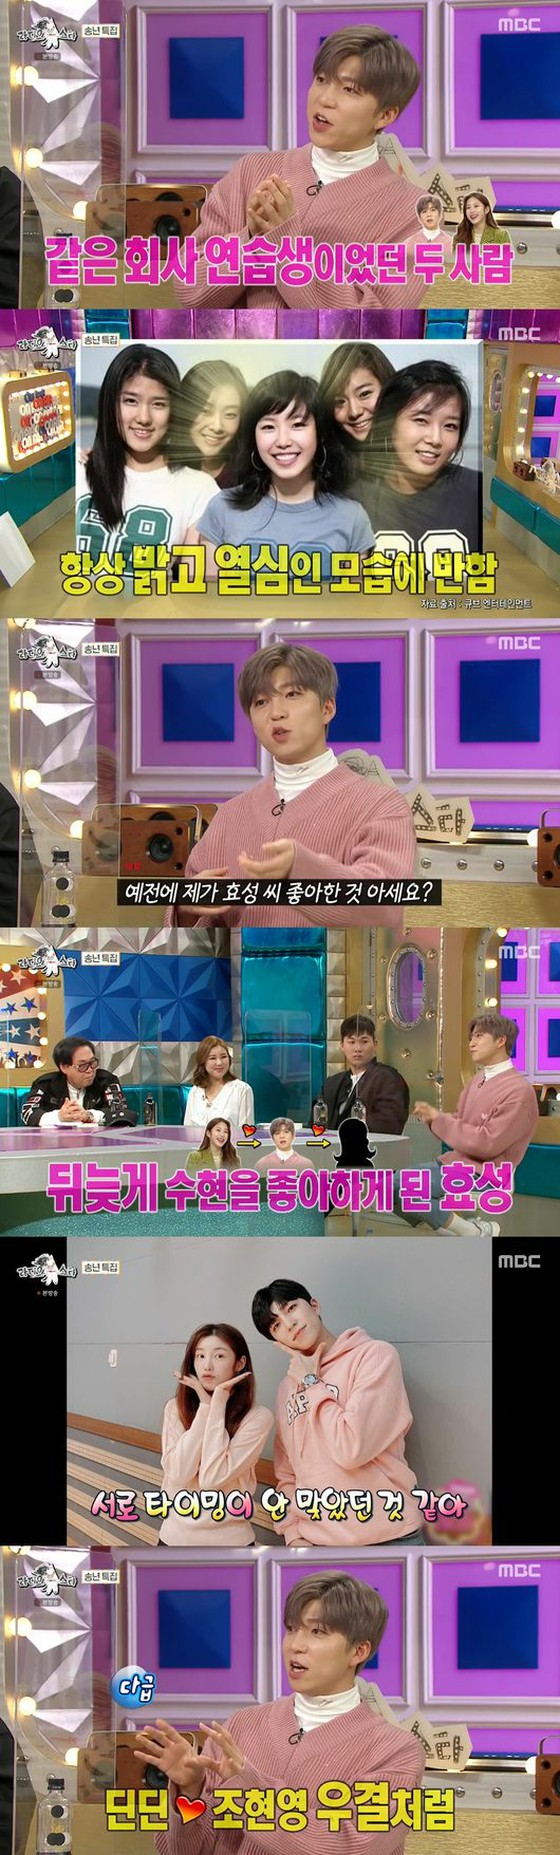 Soohyeon (U-KISS) confesses unrequited love for Hyosung (former Secret) when she was a trainee